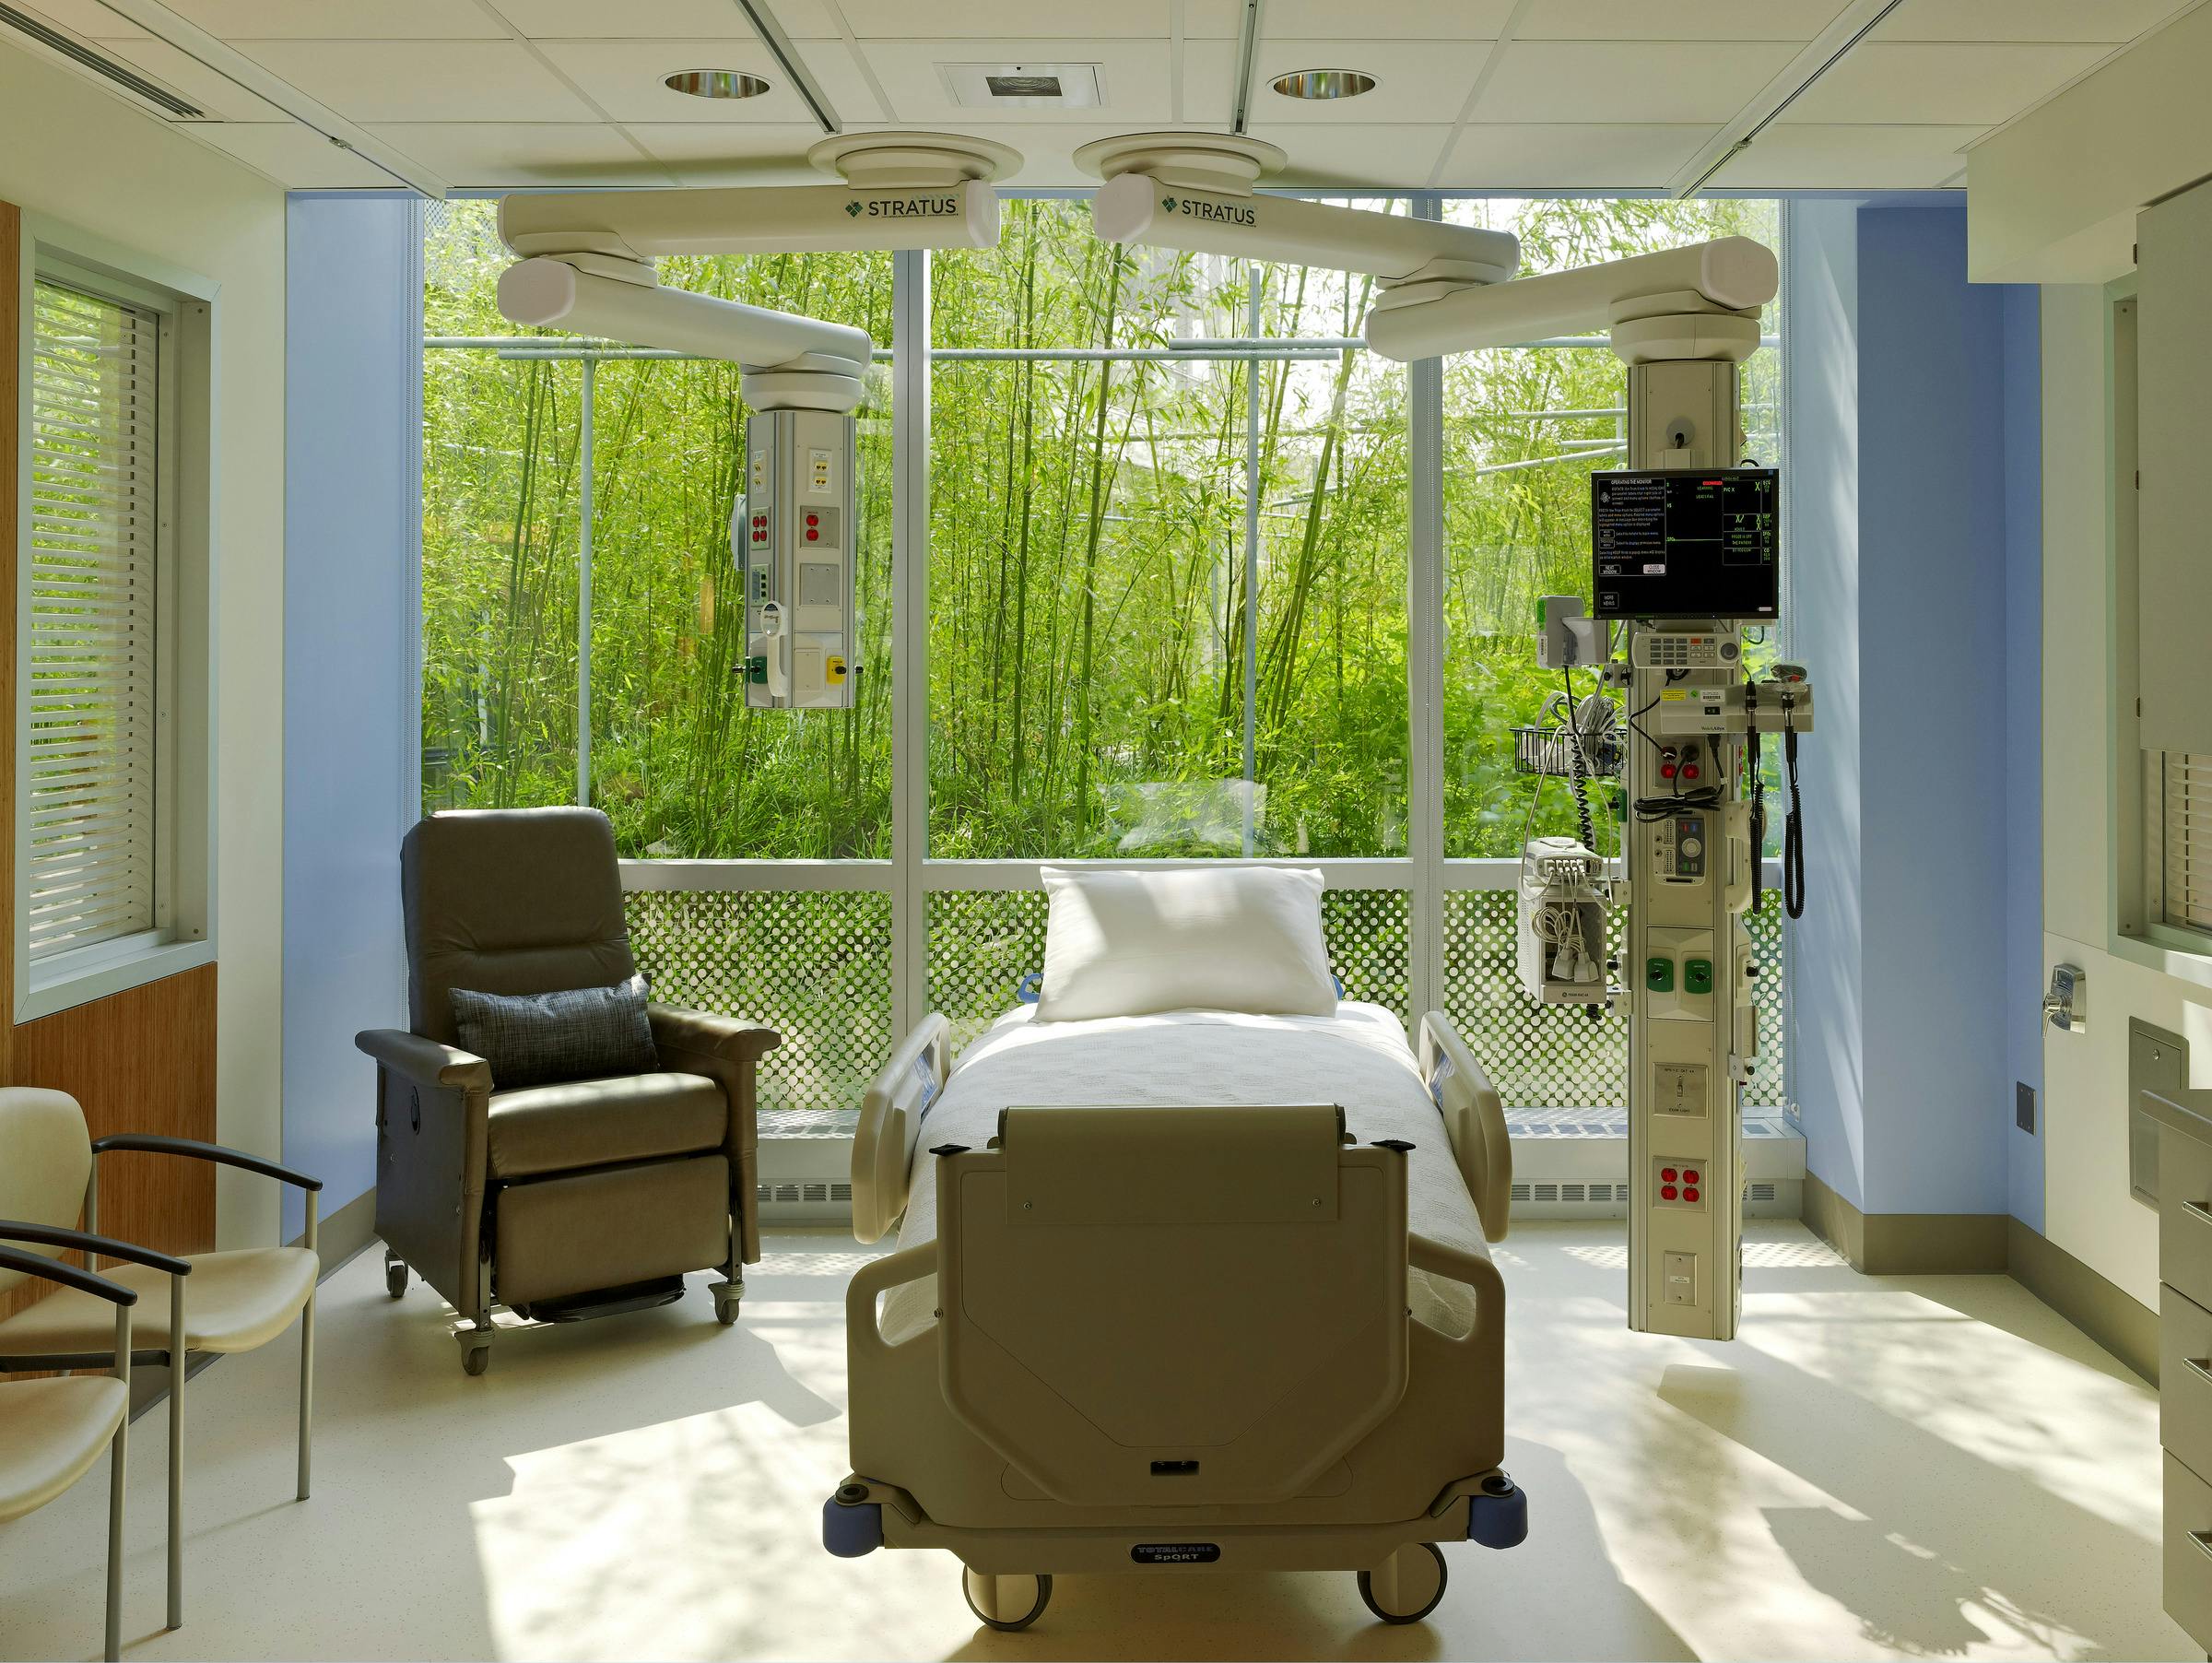 A bamboo garden was planted atop the mechanical floor to provide ICU rooms with calming views and ample daylight for family and staff caring for patients in the most critical of conditions.